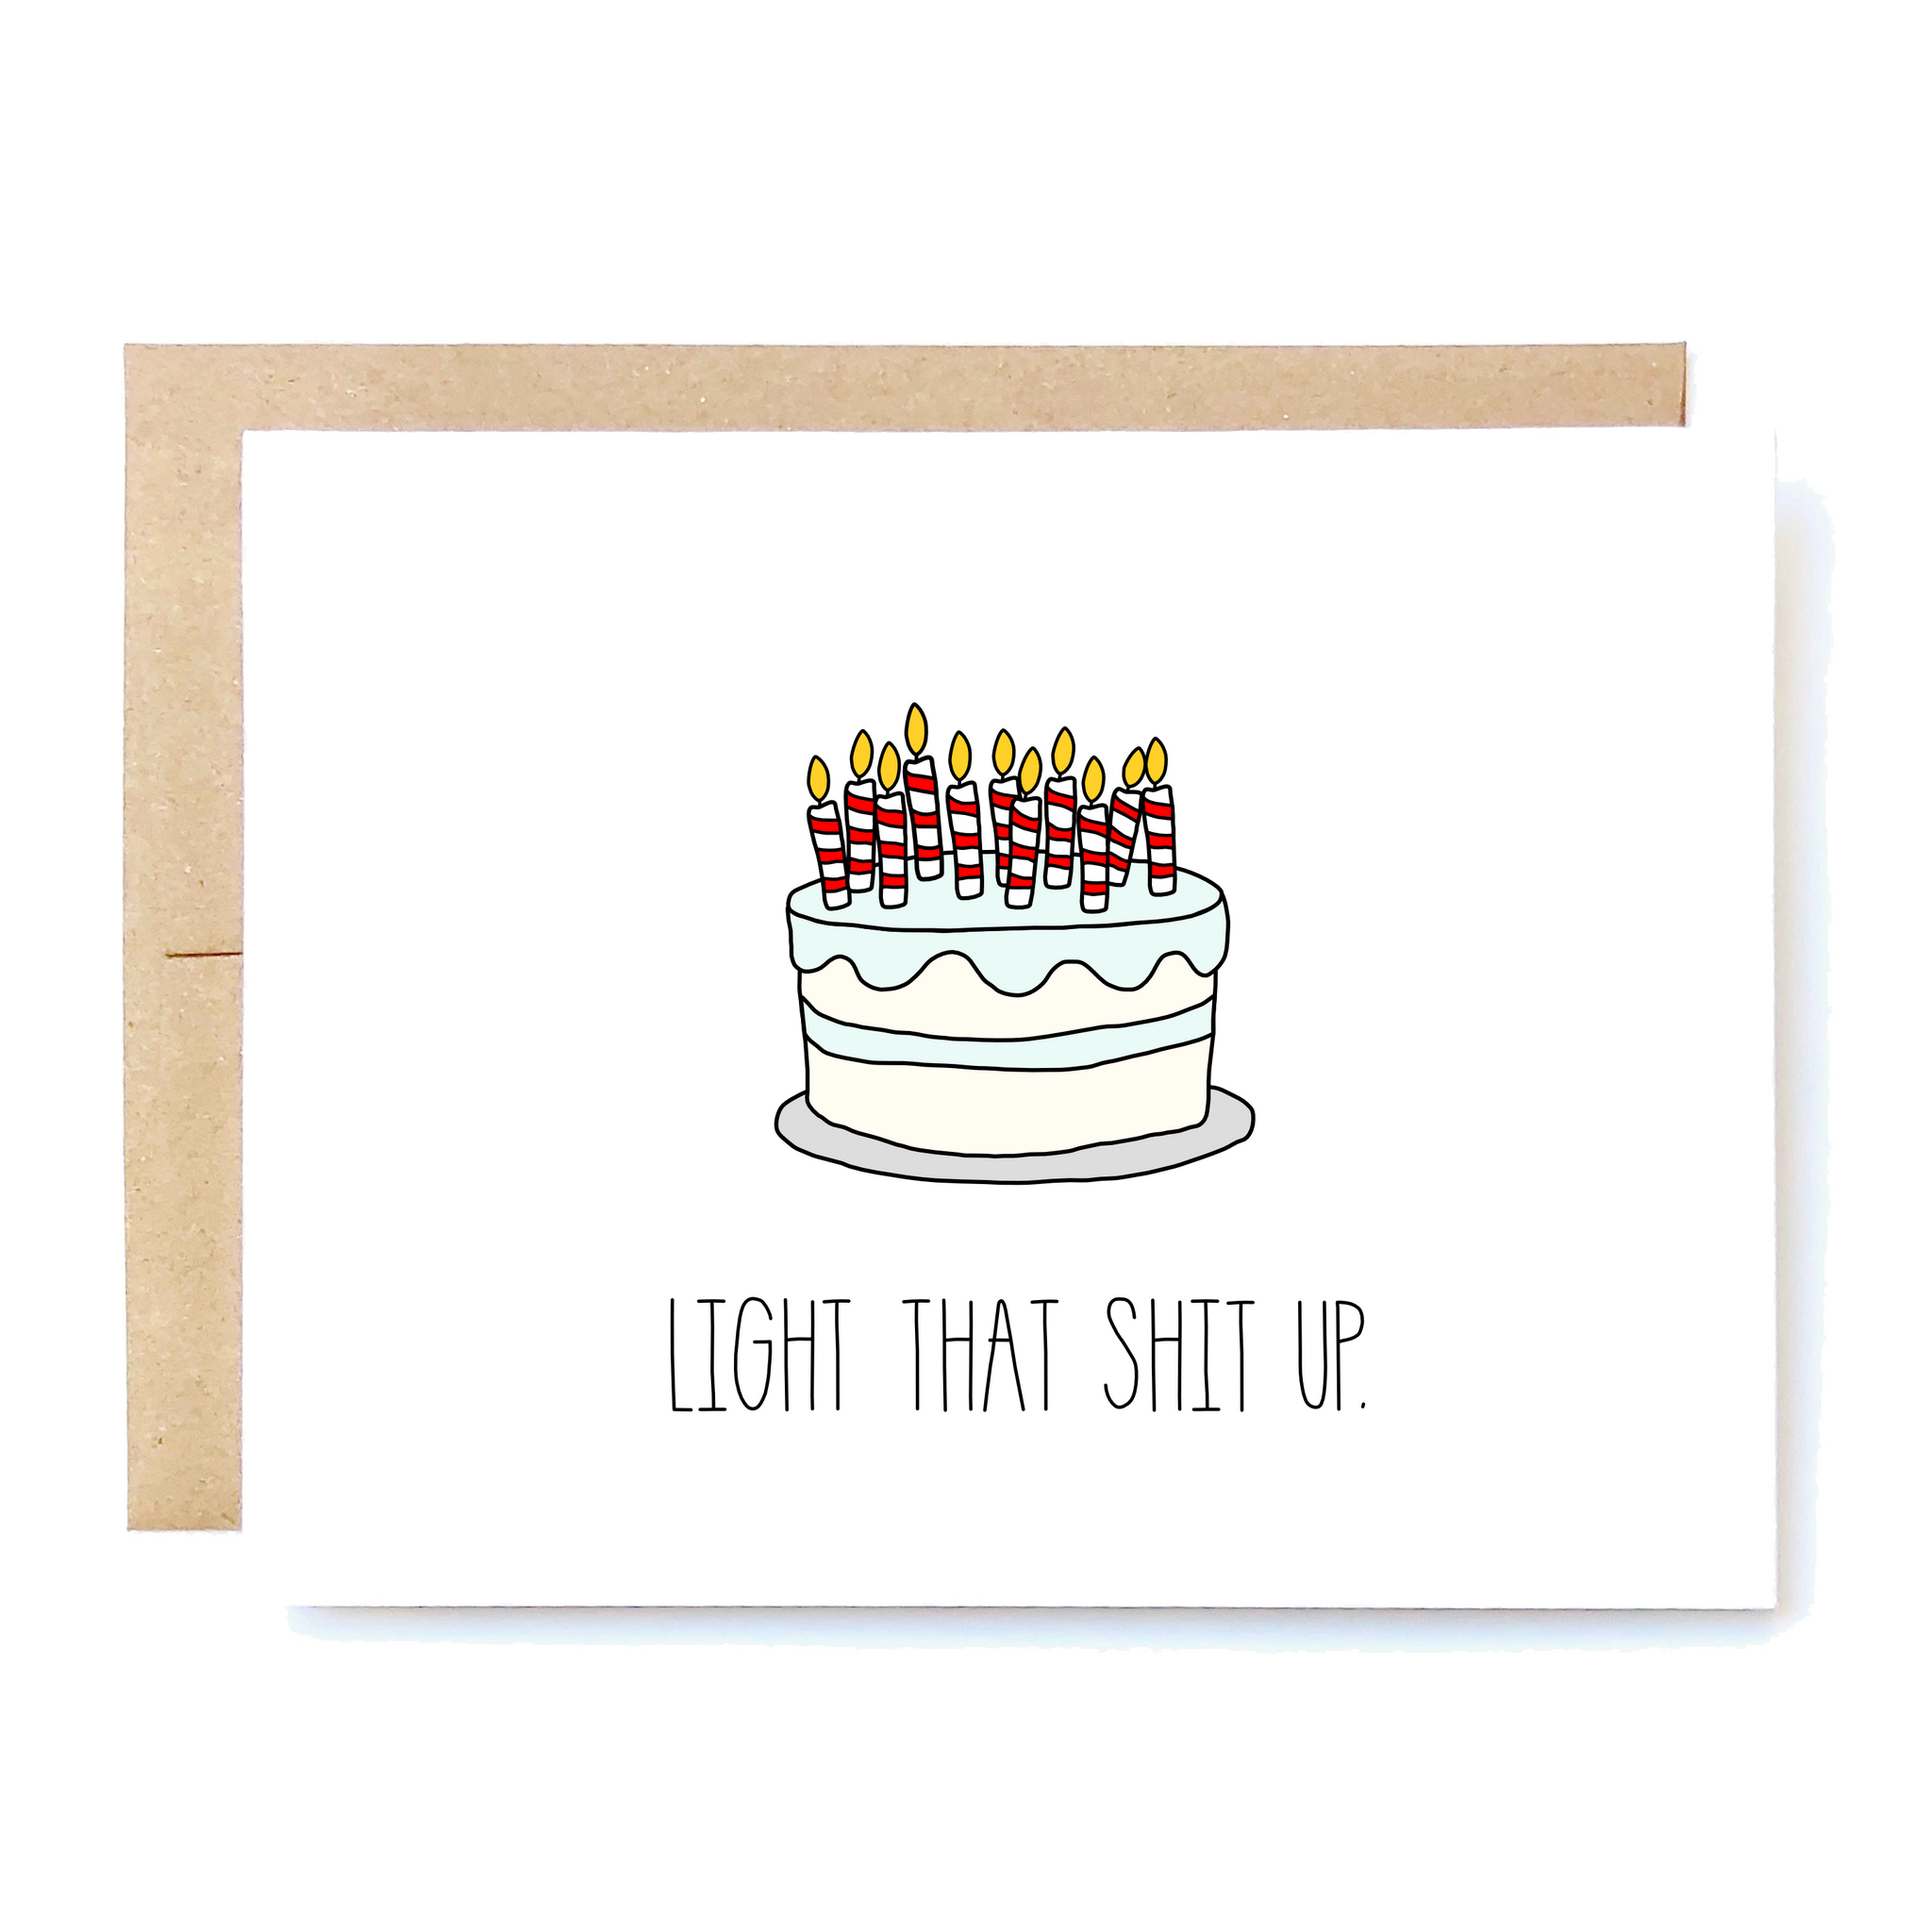 Card Front: Light that sh*t up.